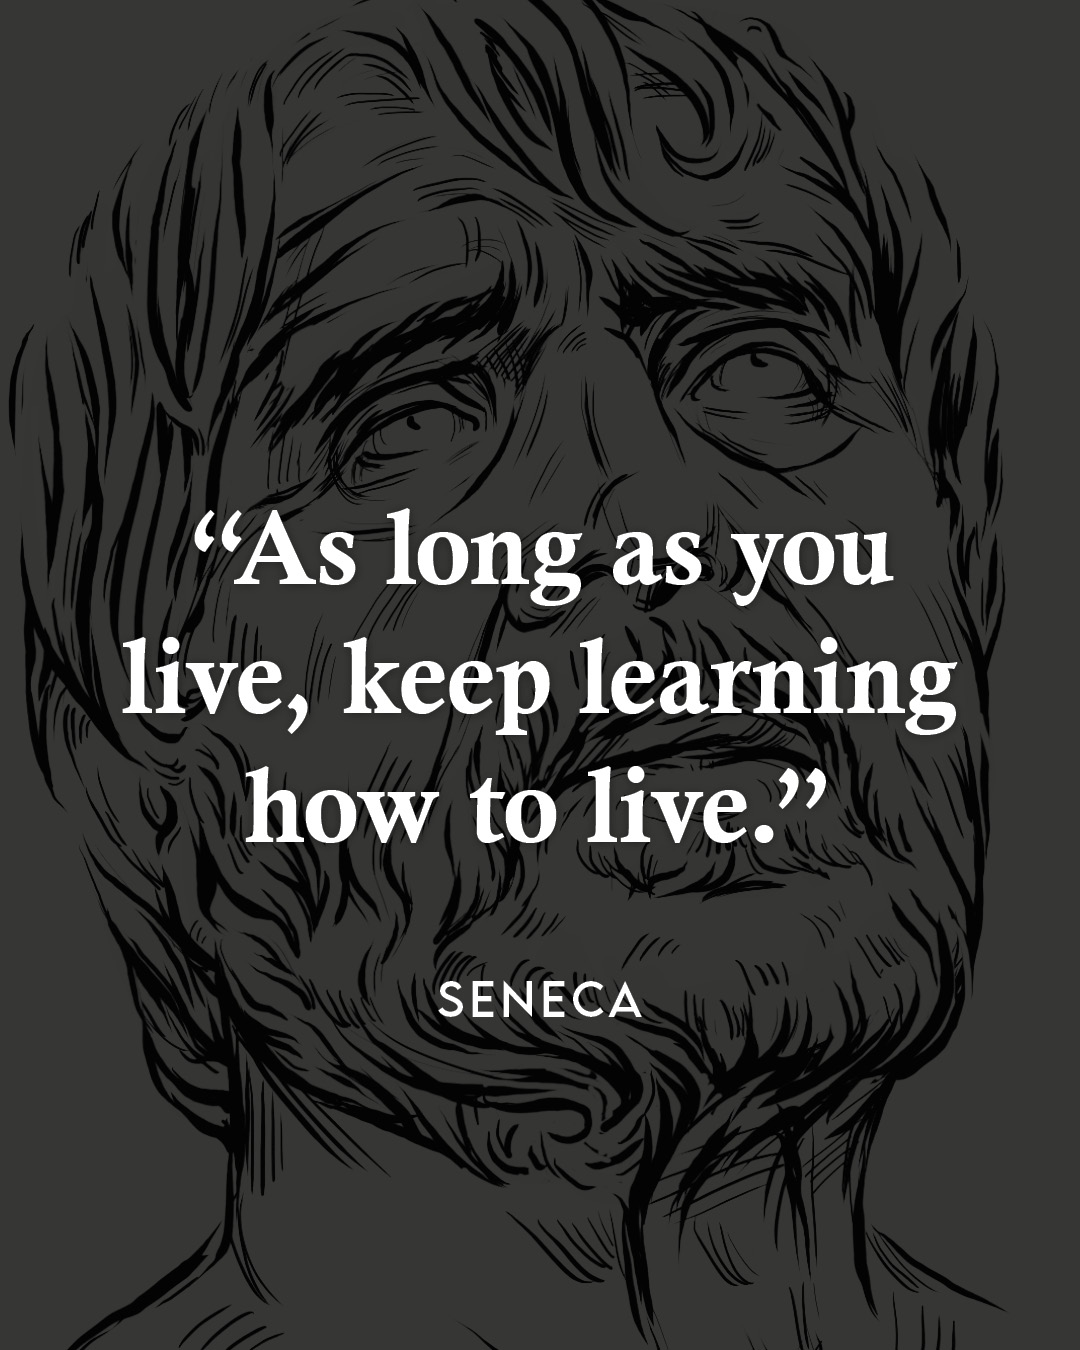 As long as you live, keep learning how to live.